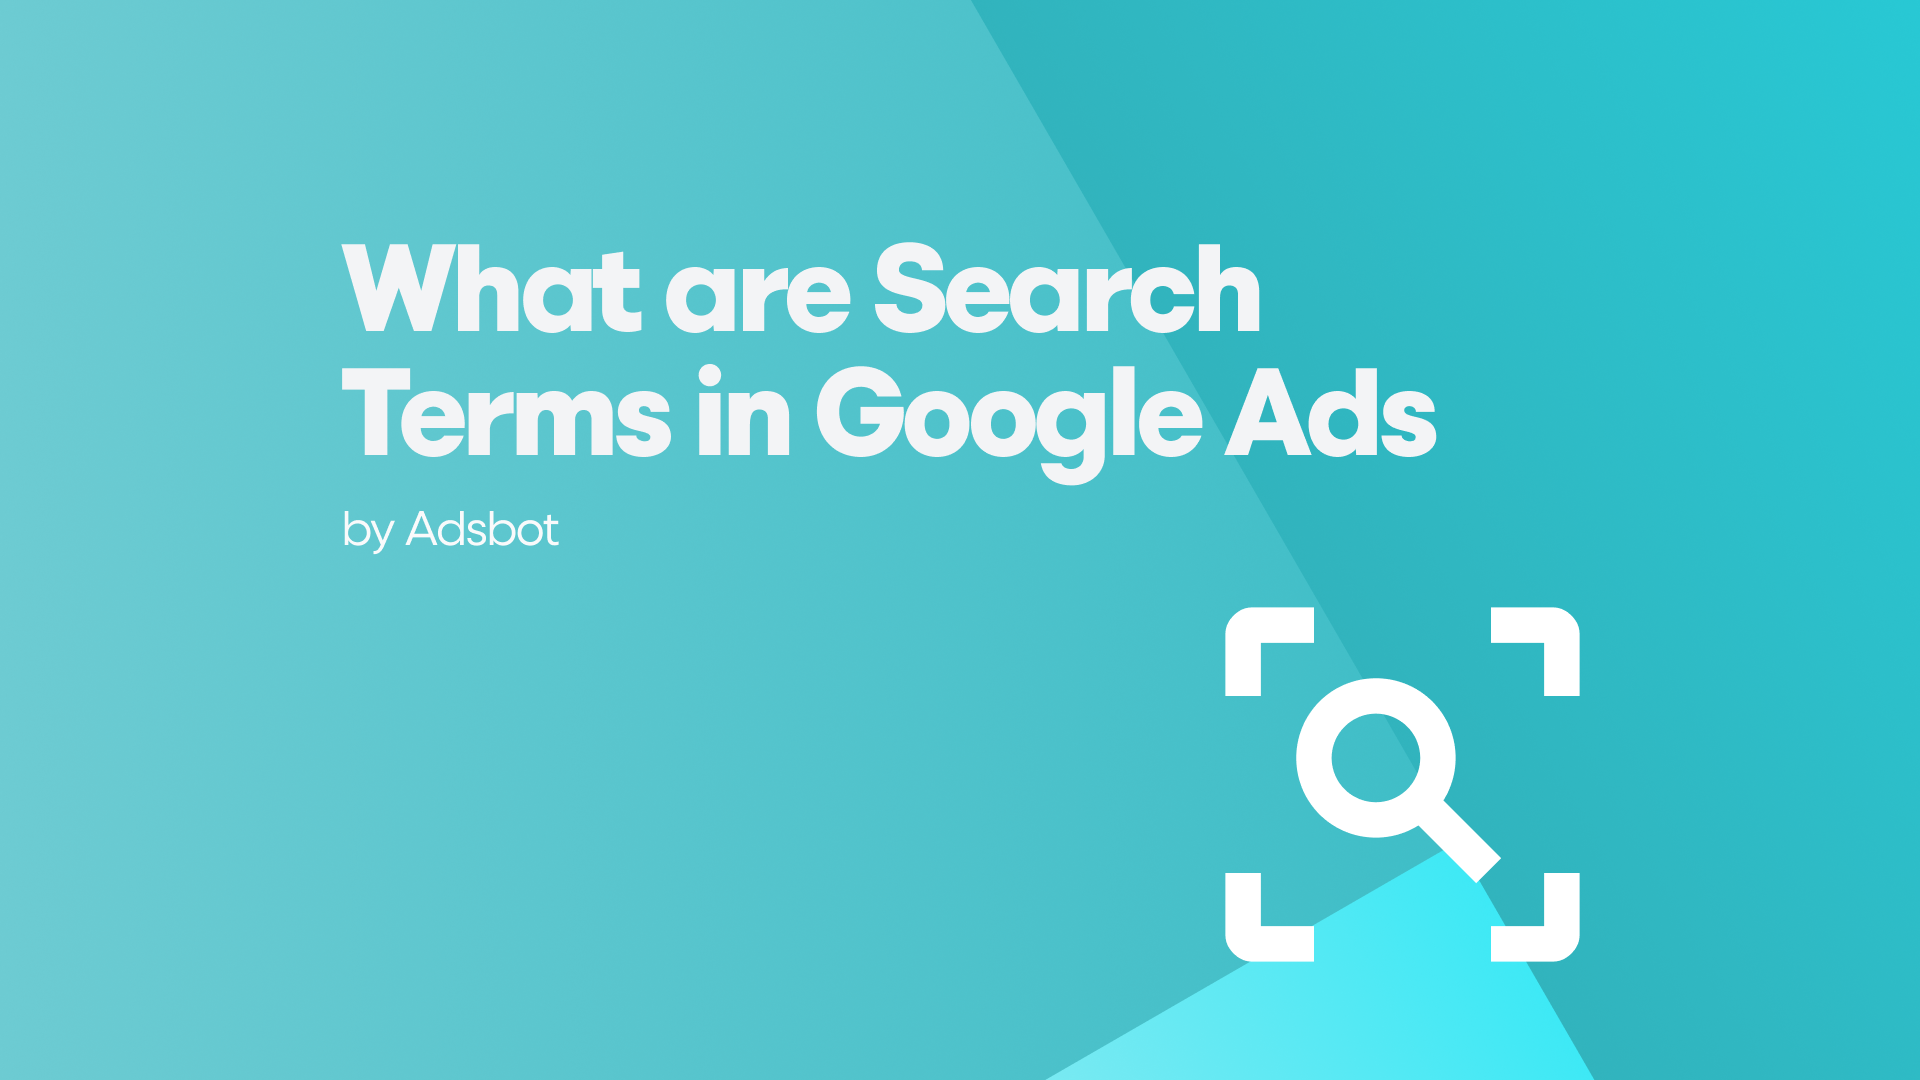 What are Search Terms in Google Ads?